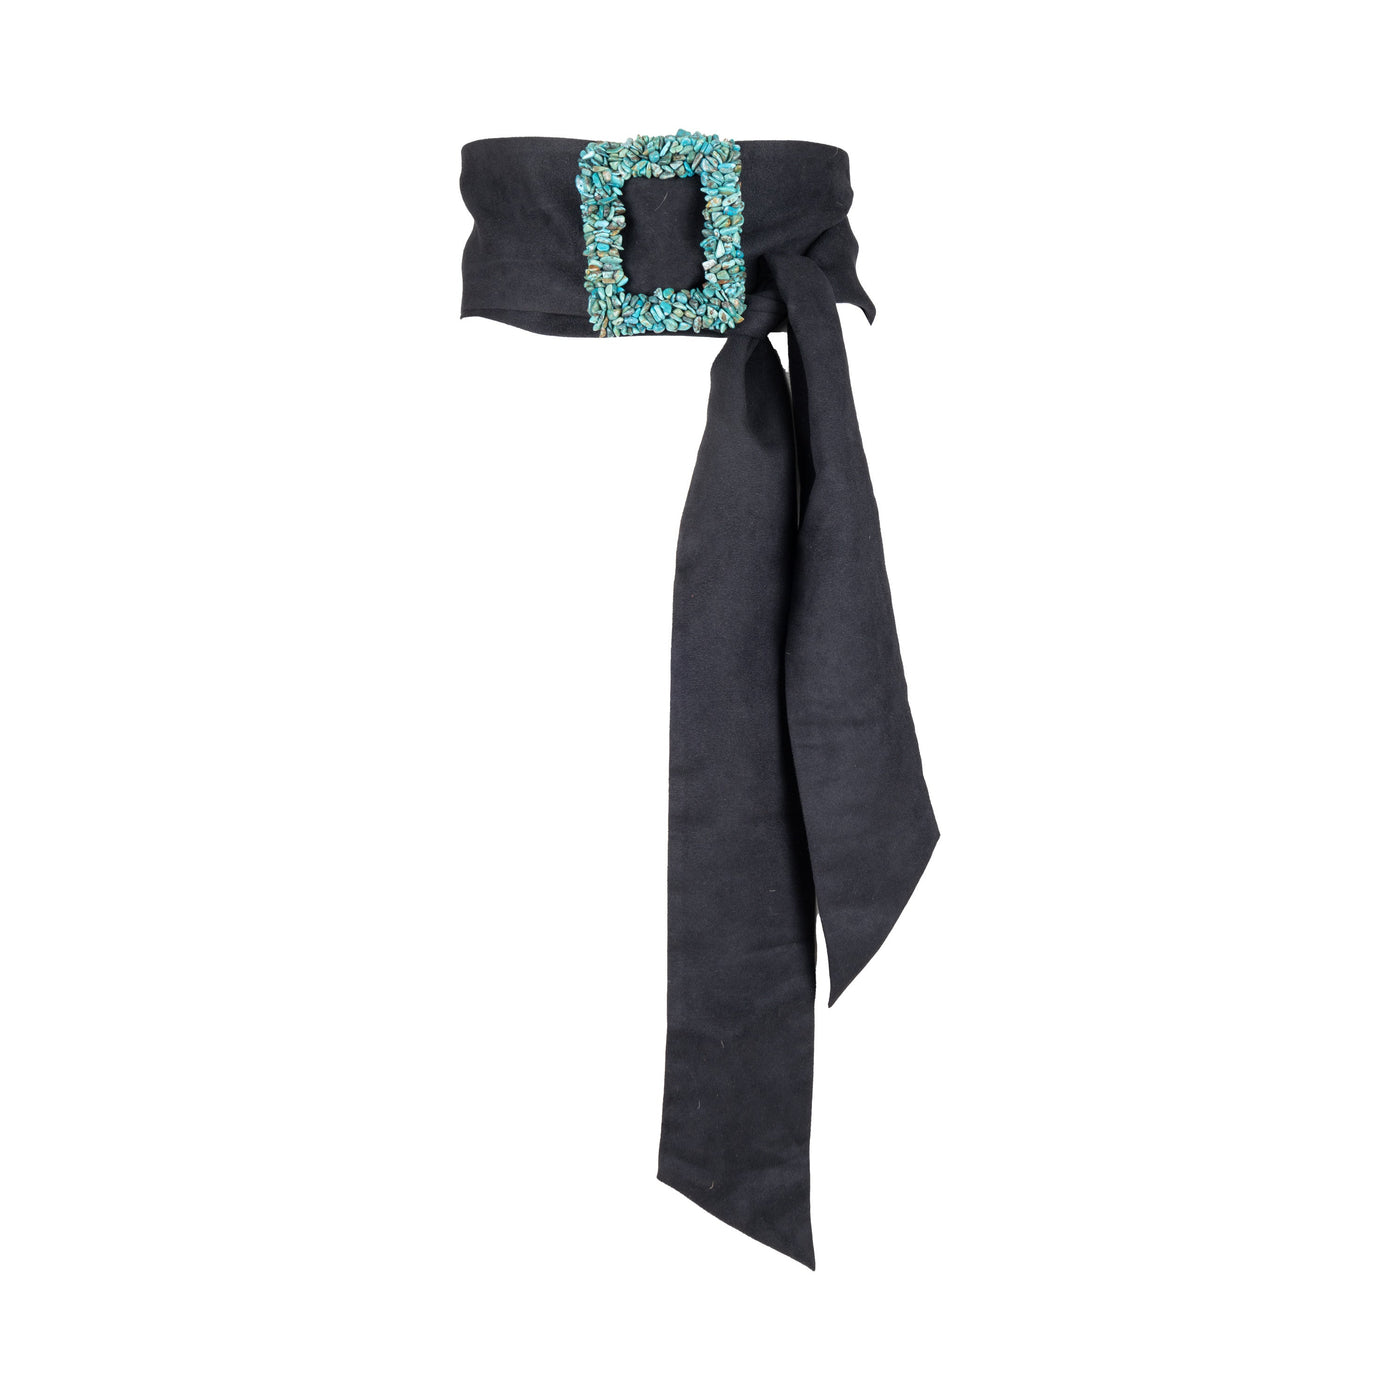 Secondhand Collection Privée Turquoise Stone Suede Belt 